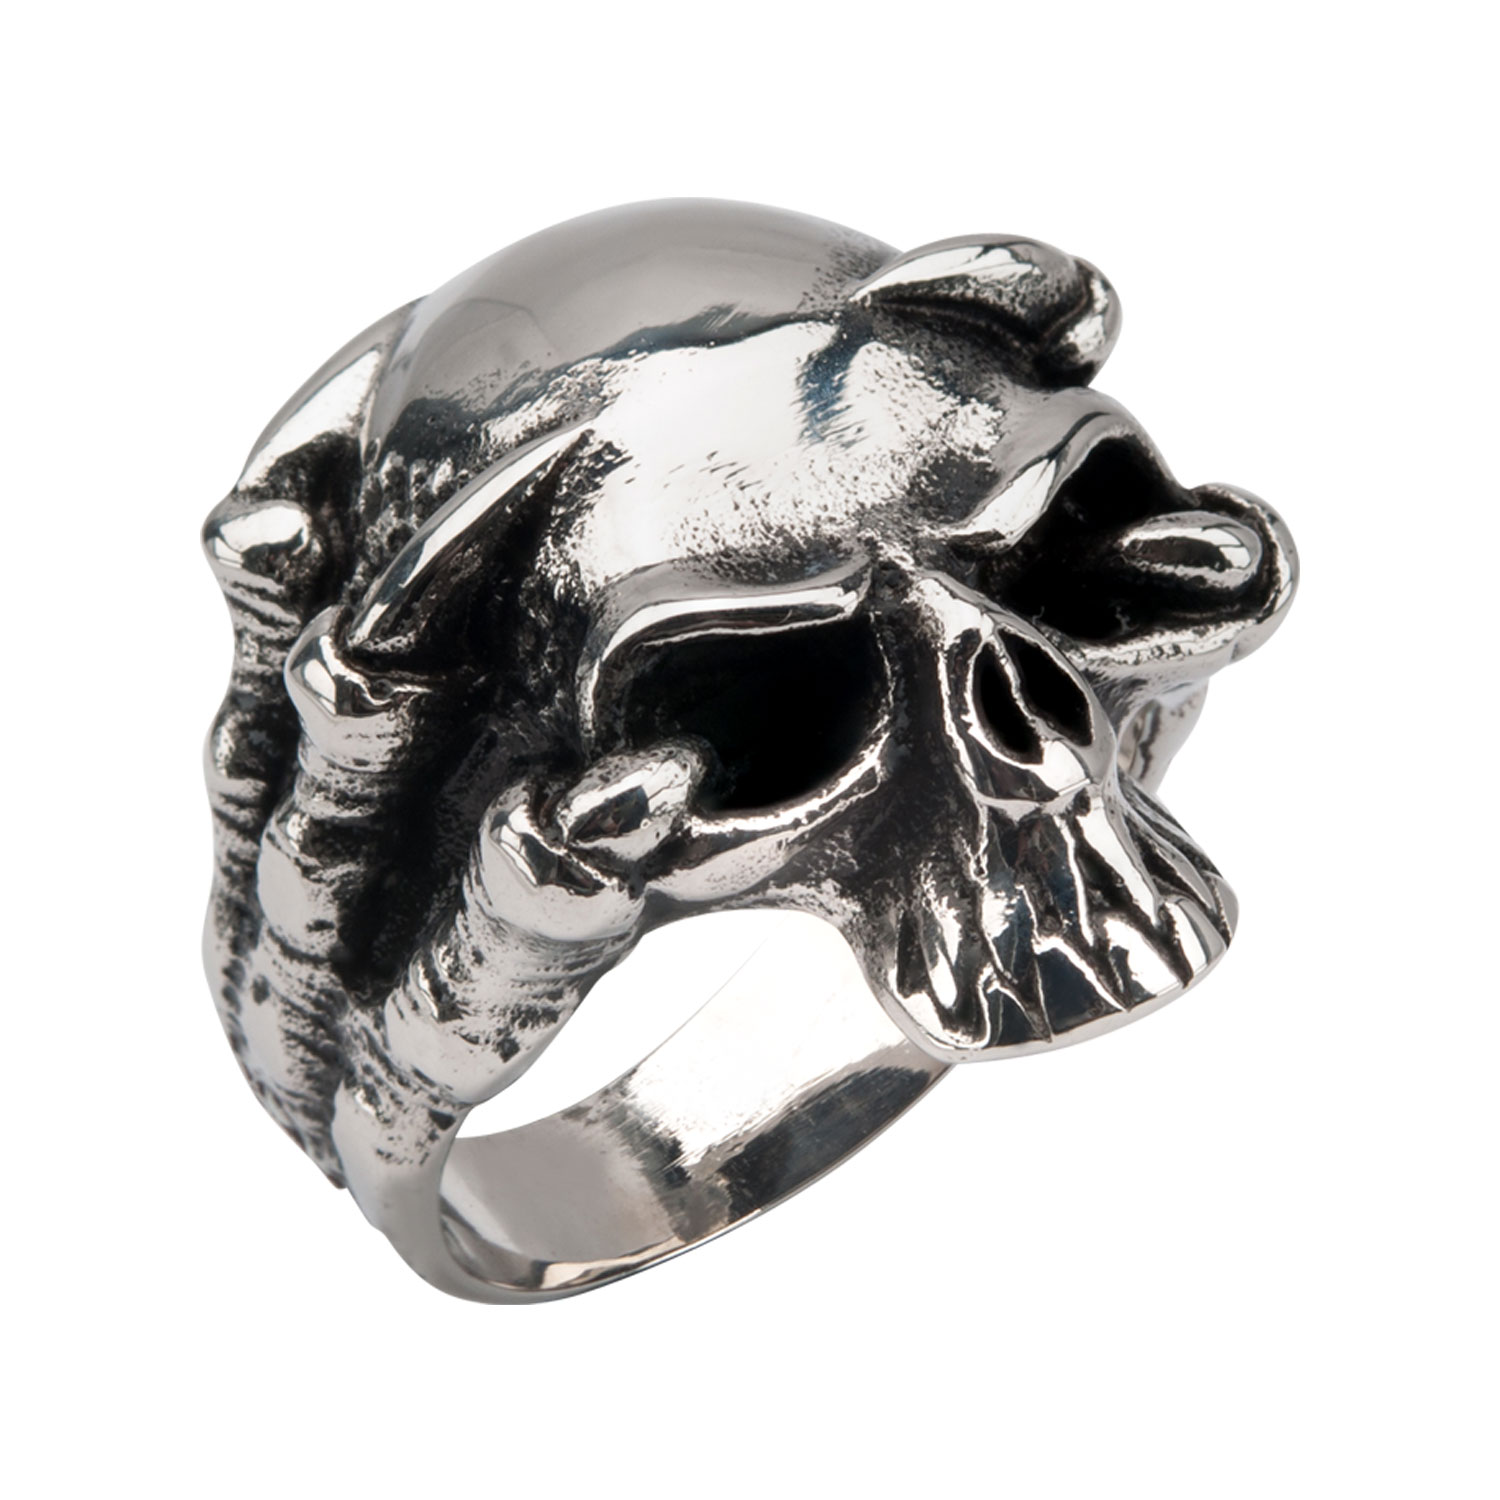 Black Oxidized Skull Ring with Claws Milano Jewelers Pembroke Pines, FL